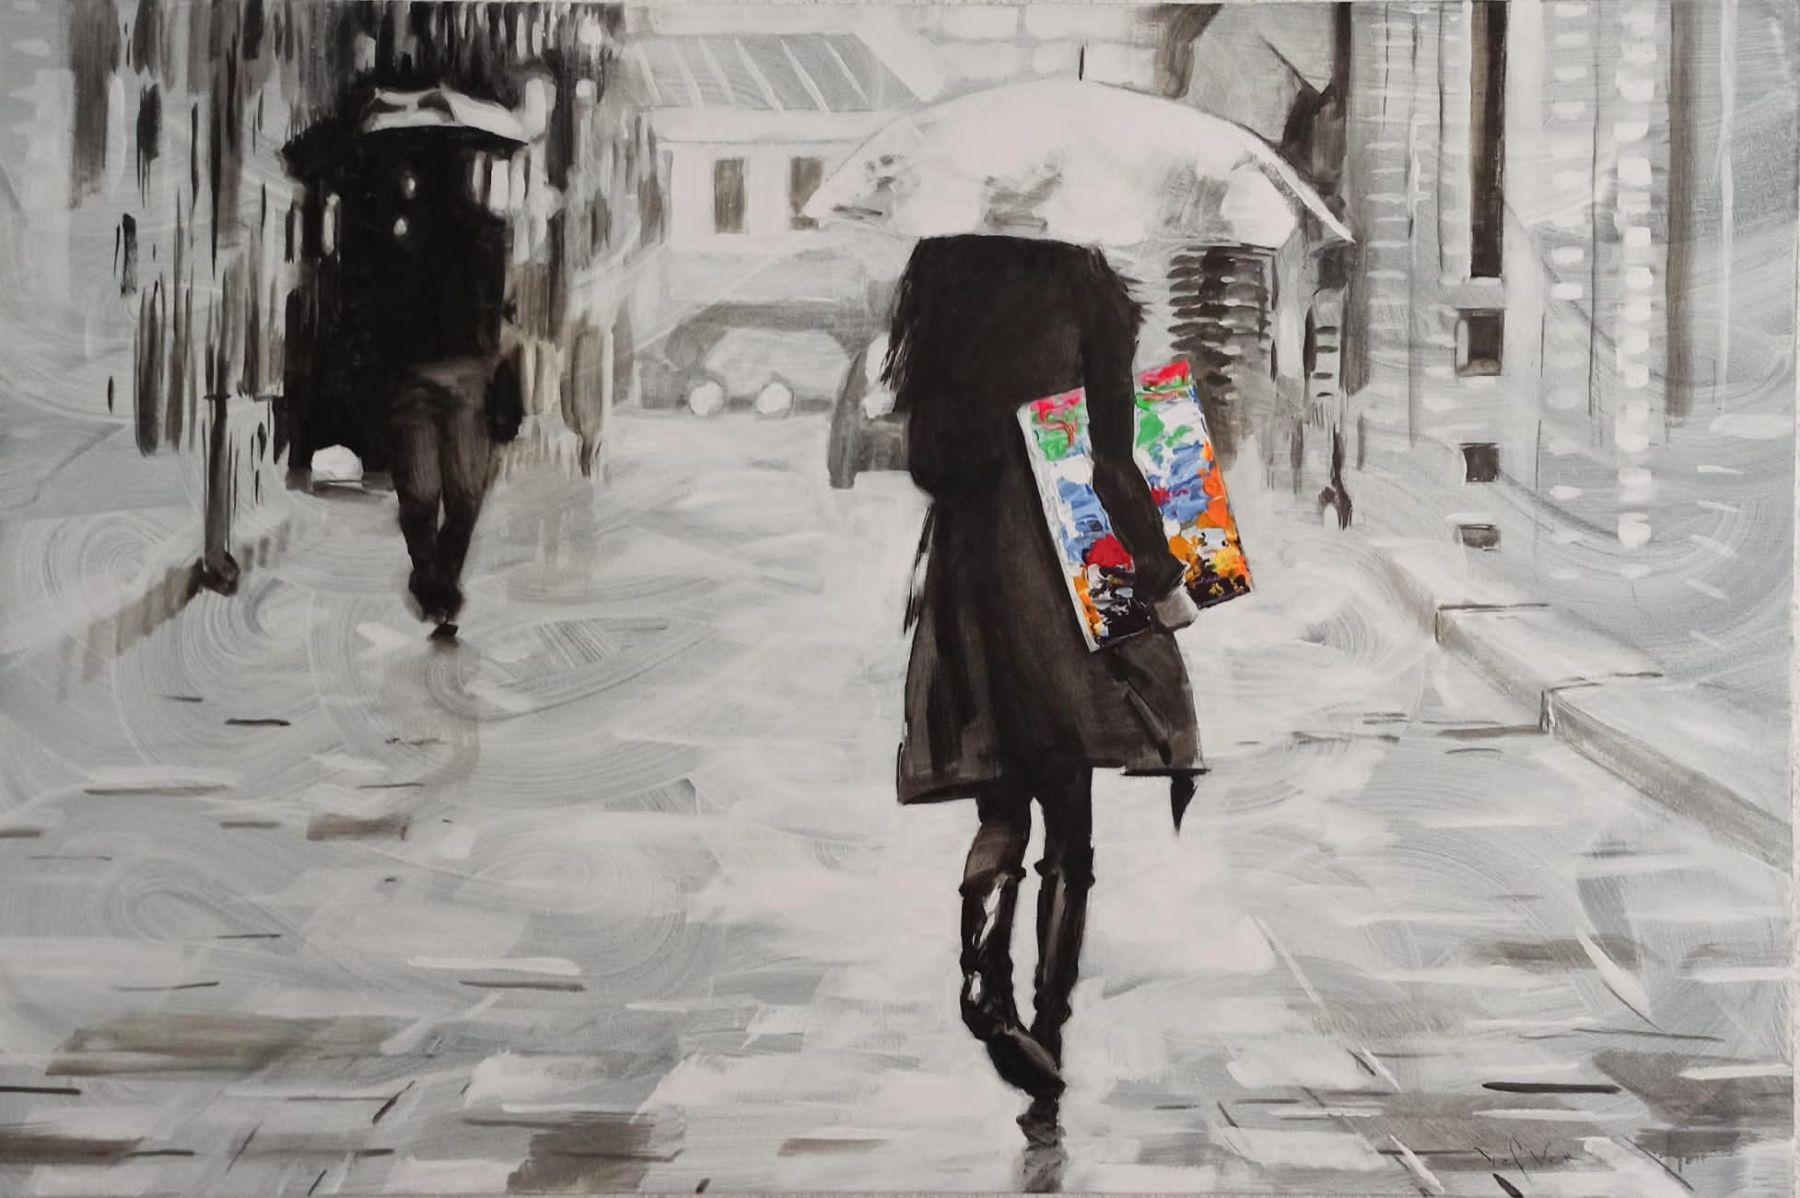 "Caught in the Rain" 39x58 is an oil painting on canvas by artist Pedro Velver. Featured in a feminine figure obscured under an umbrella. In her arm she carries a bright abstract painting in thick paint and vibrant colors. The entirety of the